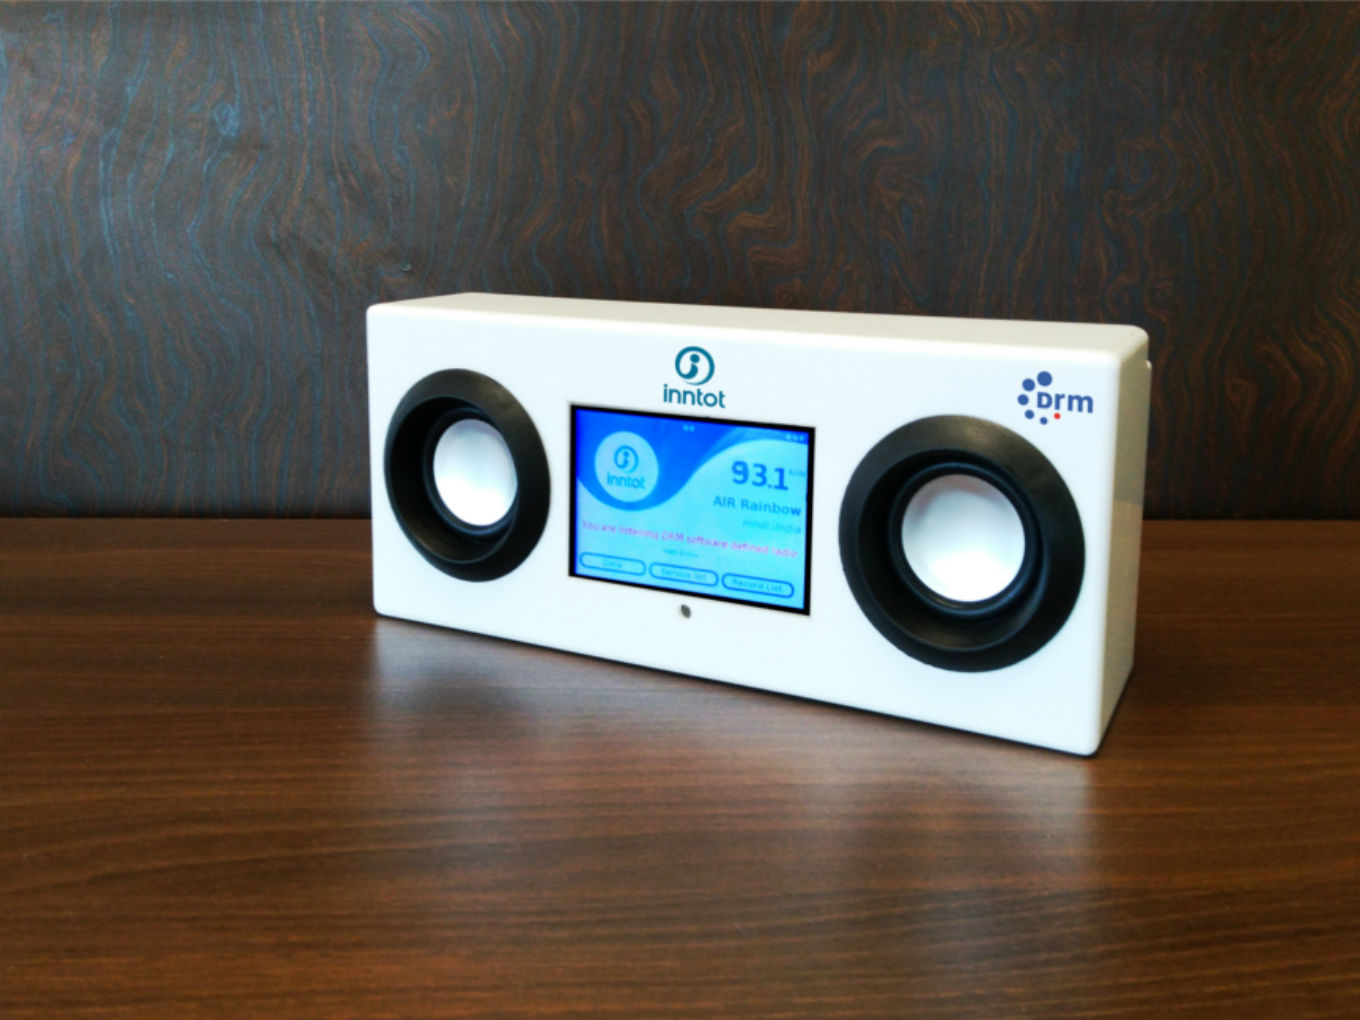 Inntot Is Looking To Make Waves With Its Digital Radio Solutions